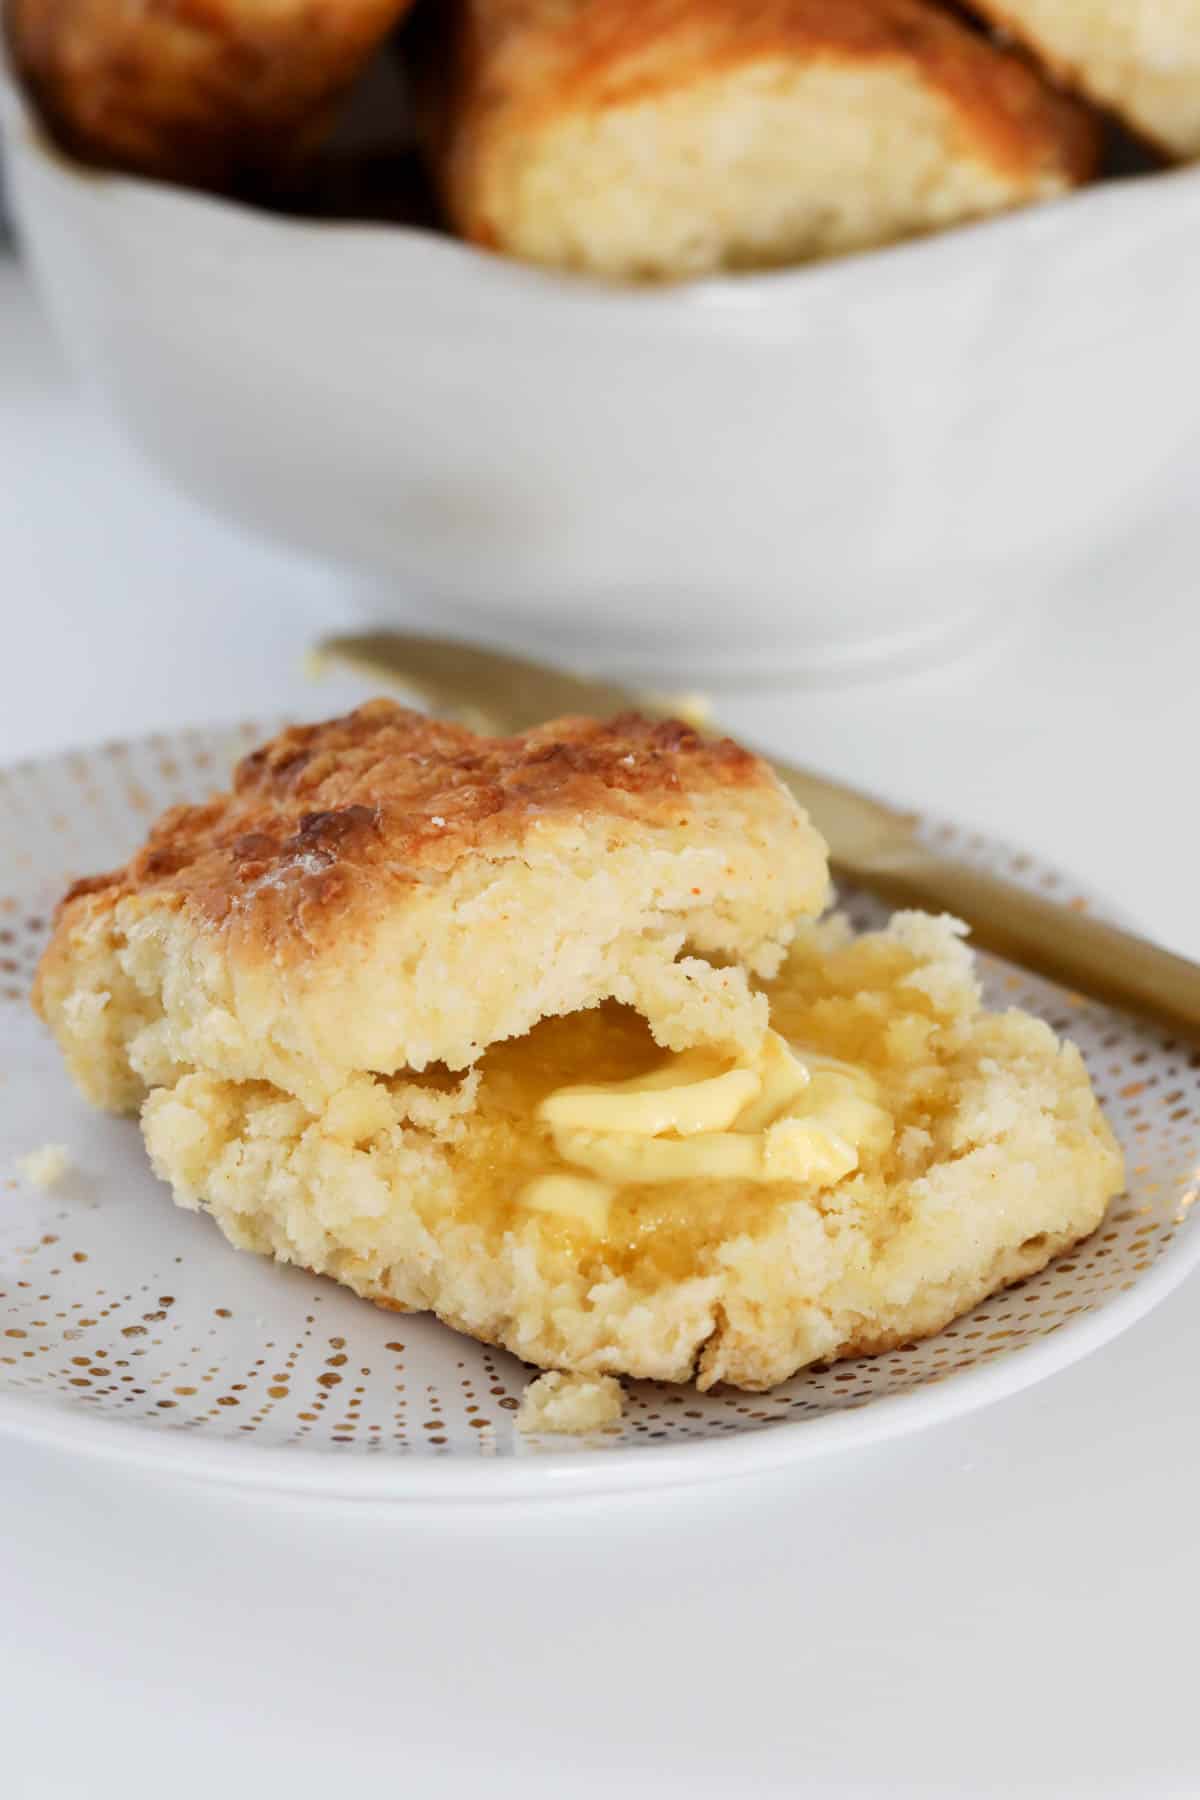 A buttered scone, cut and served on a plate.